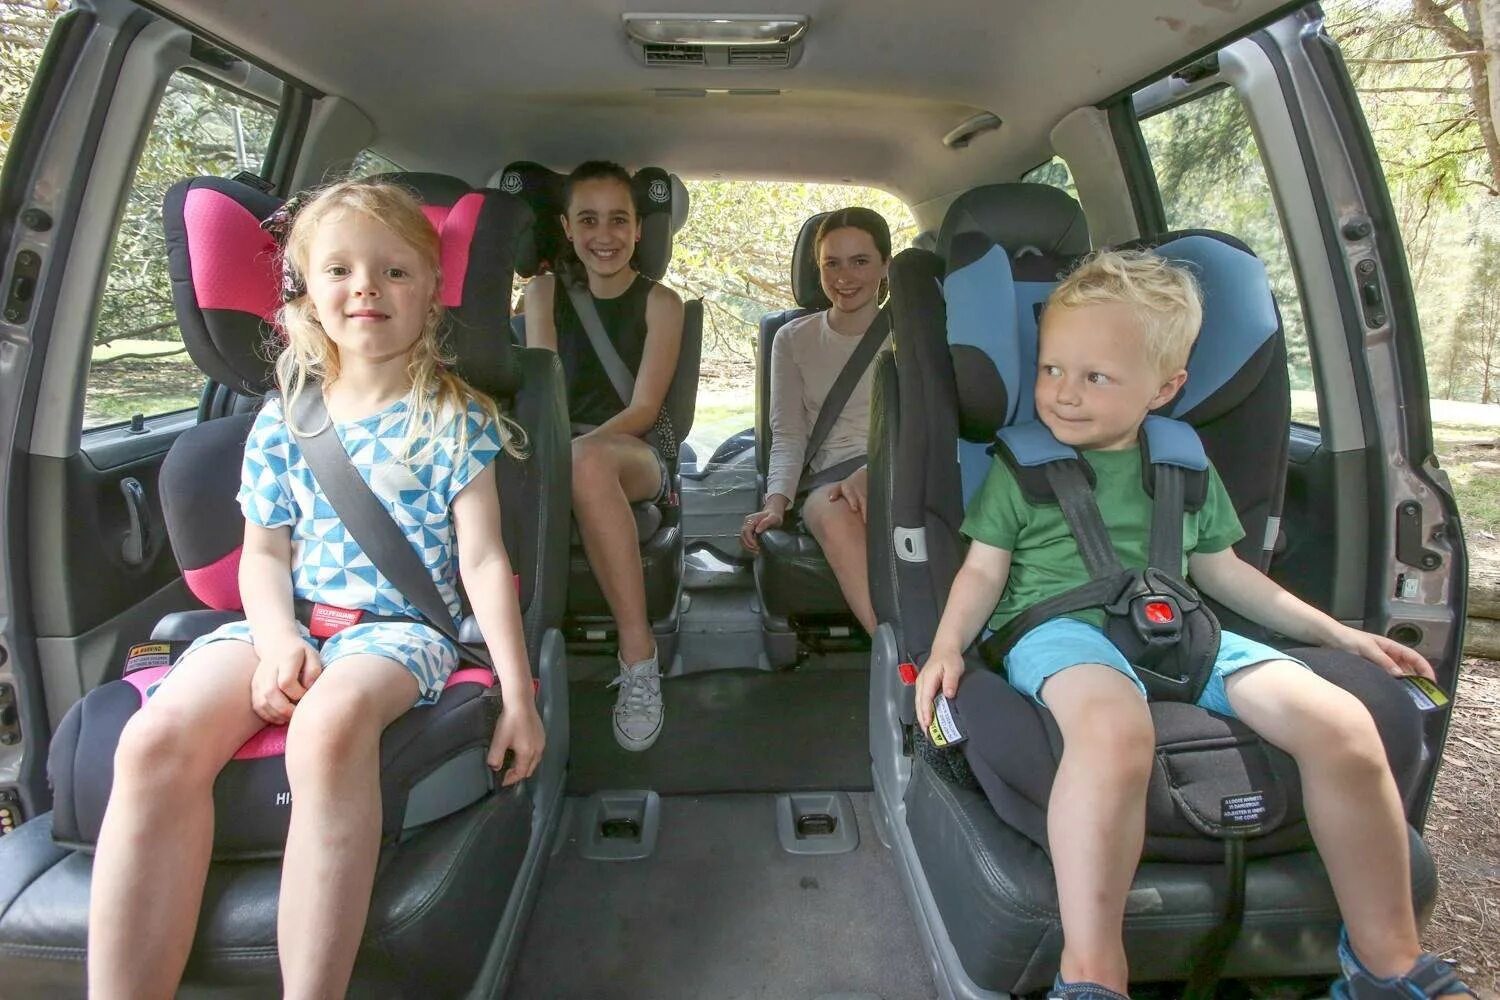 Diapered Kids car Seat. Kids diapers in car Seat. Kids diapers in car back Seat. Child sitting in Baby Safety Seat.